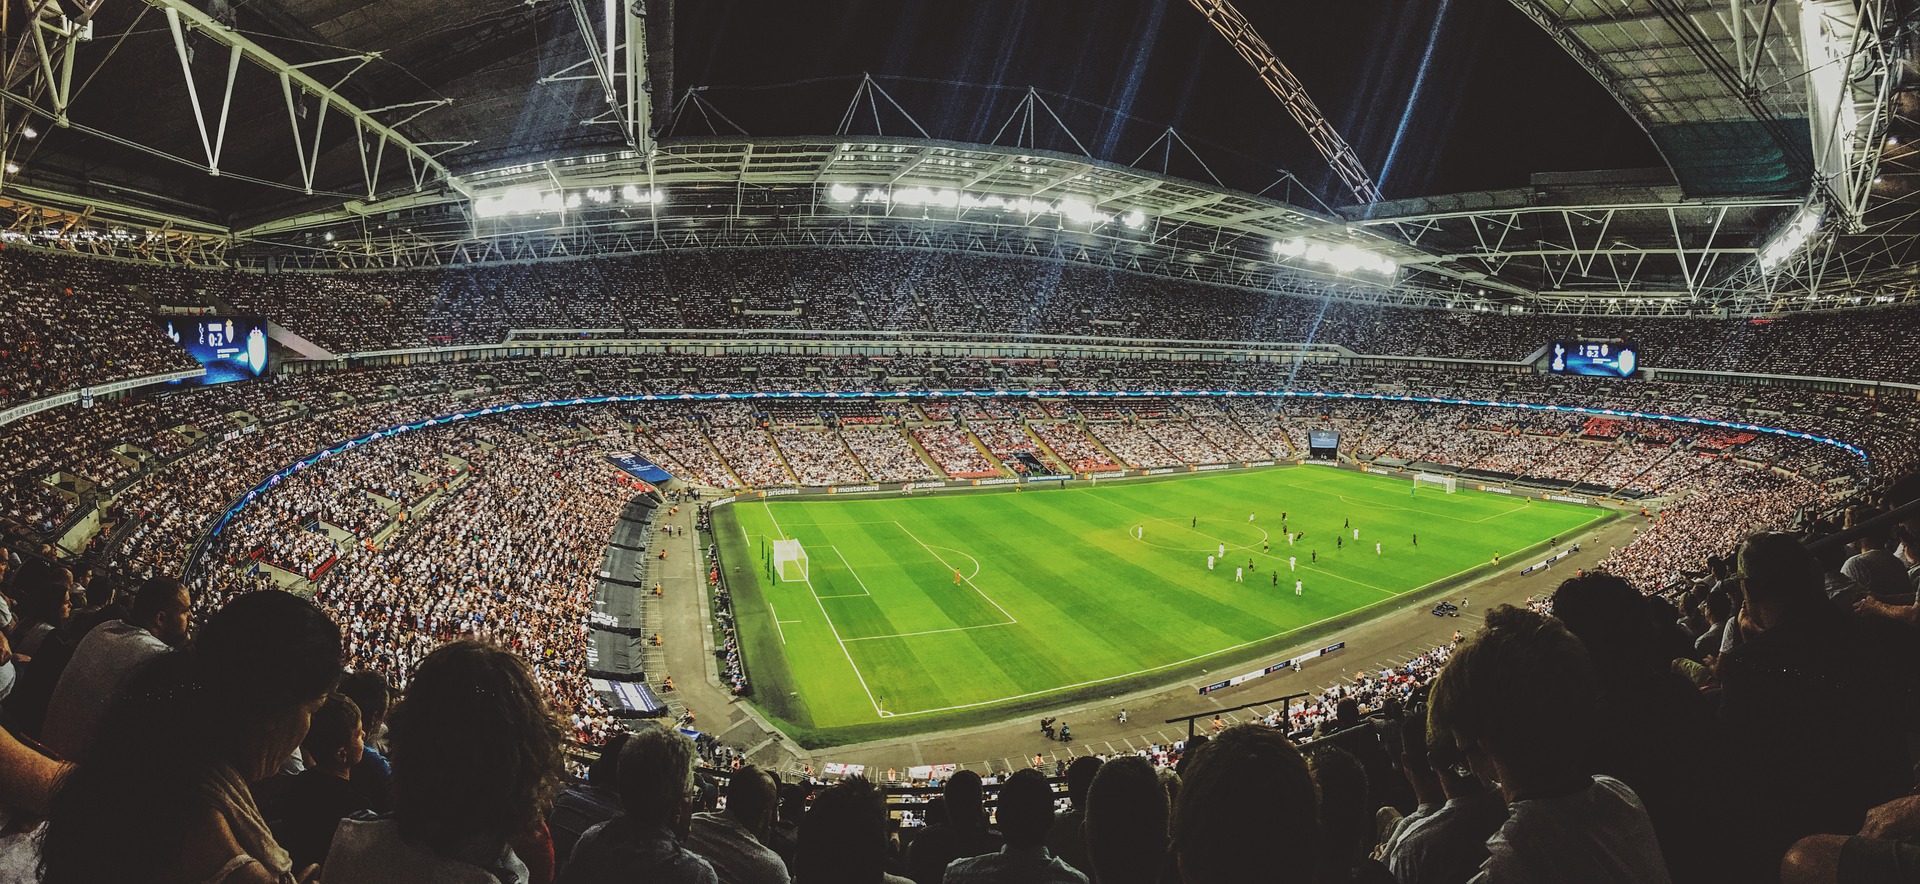 Panoramic photograph of a soccer stadium. It appears that all the seats are full while players stand on the field.